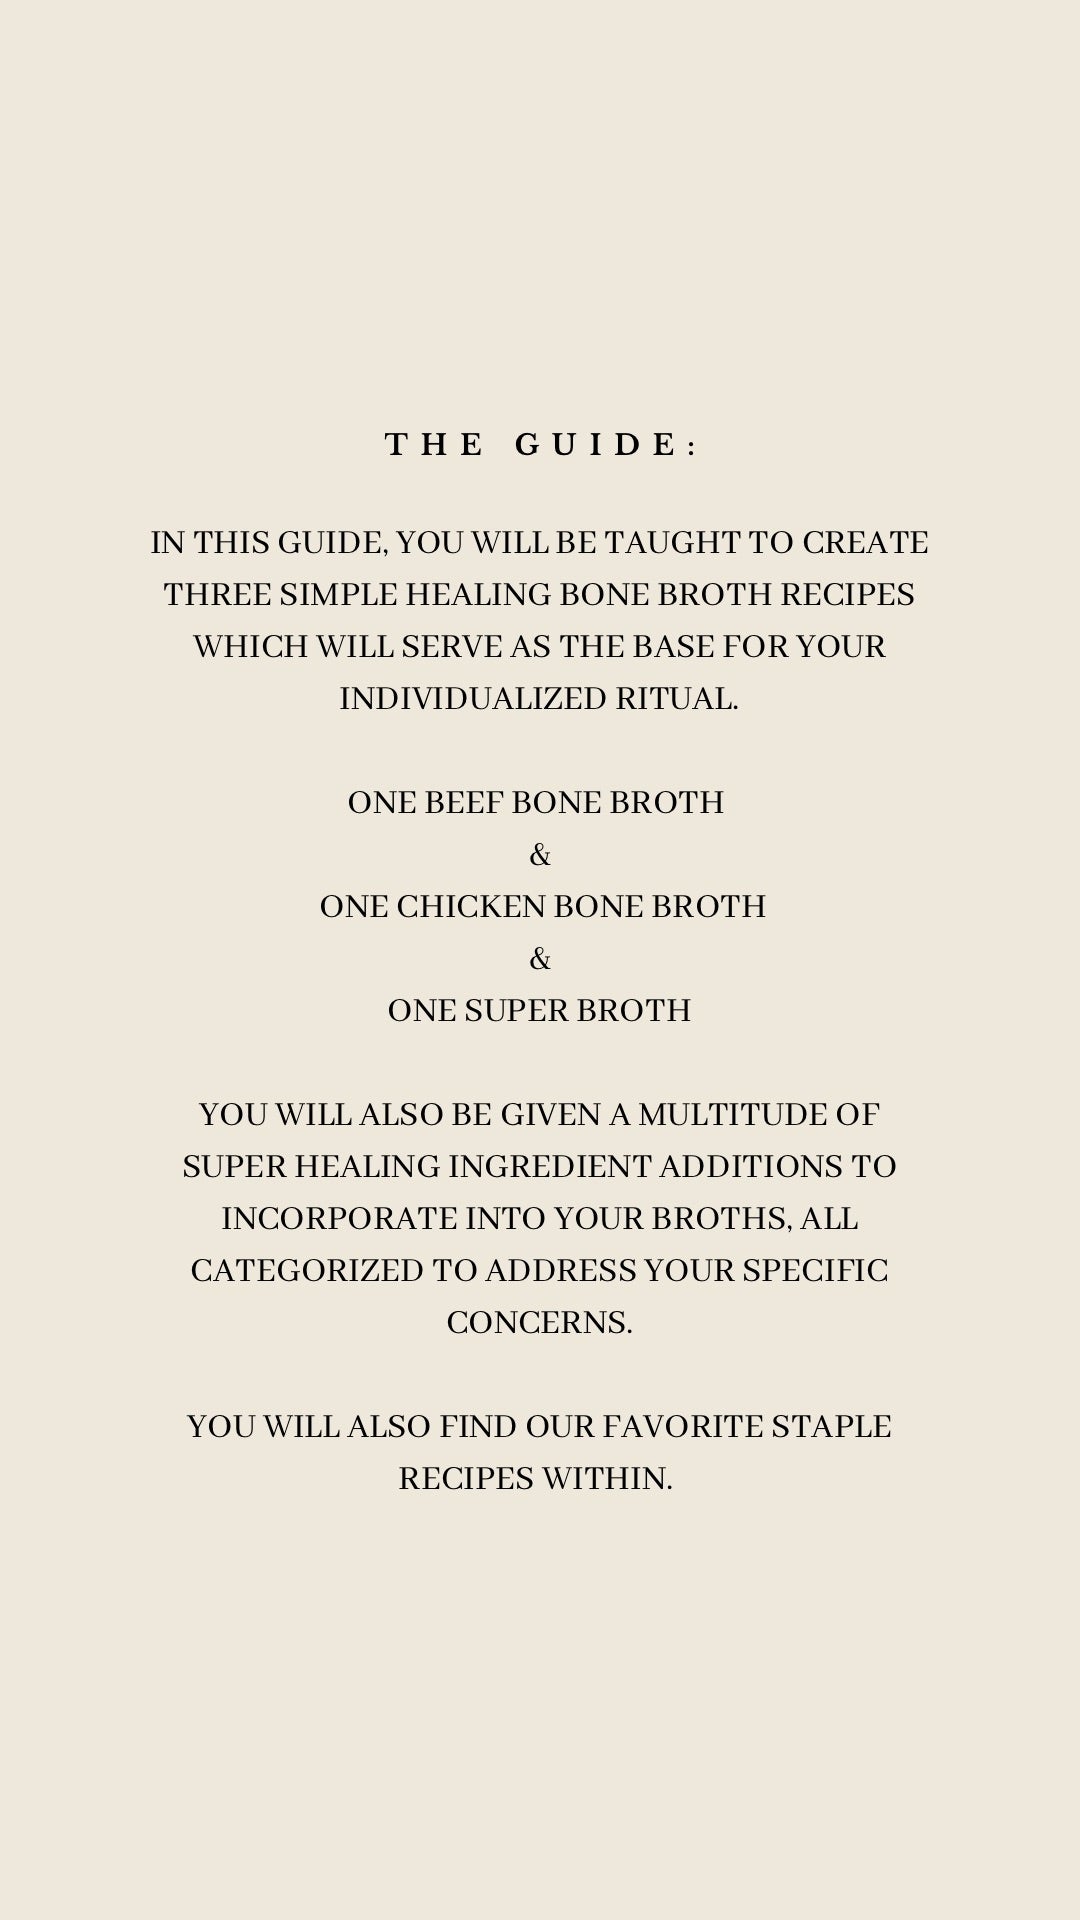 INTUITIVE HEALING: THE ULTIMATE BONE BROTH GUIDE